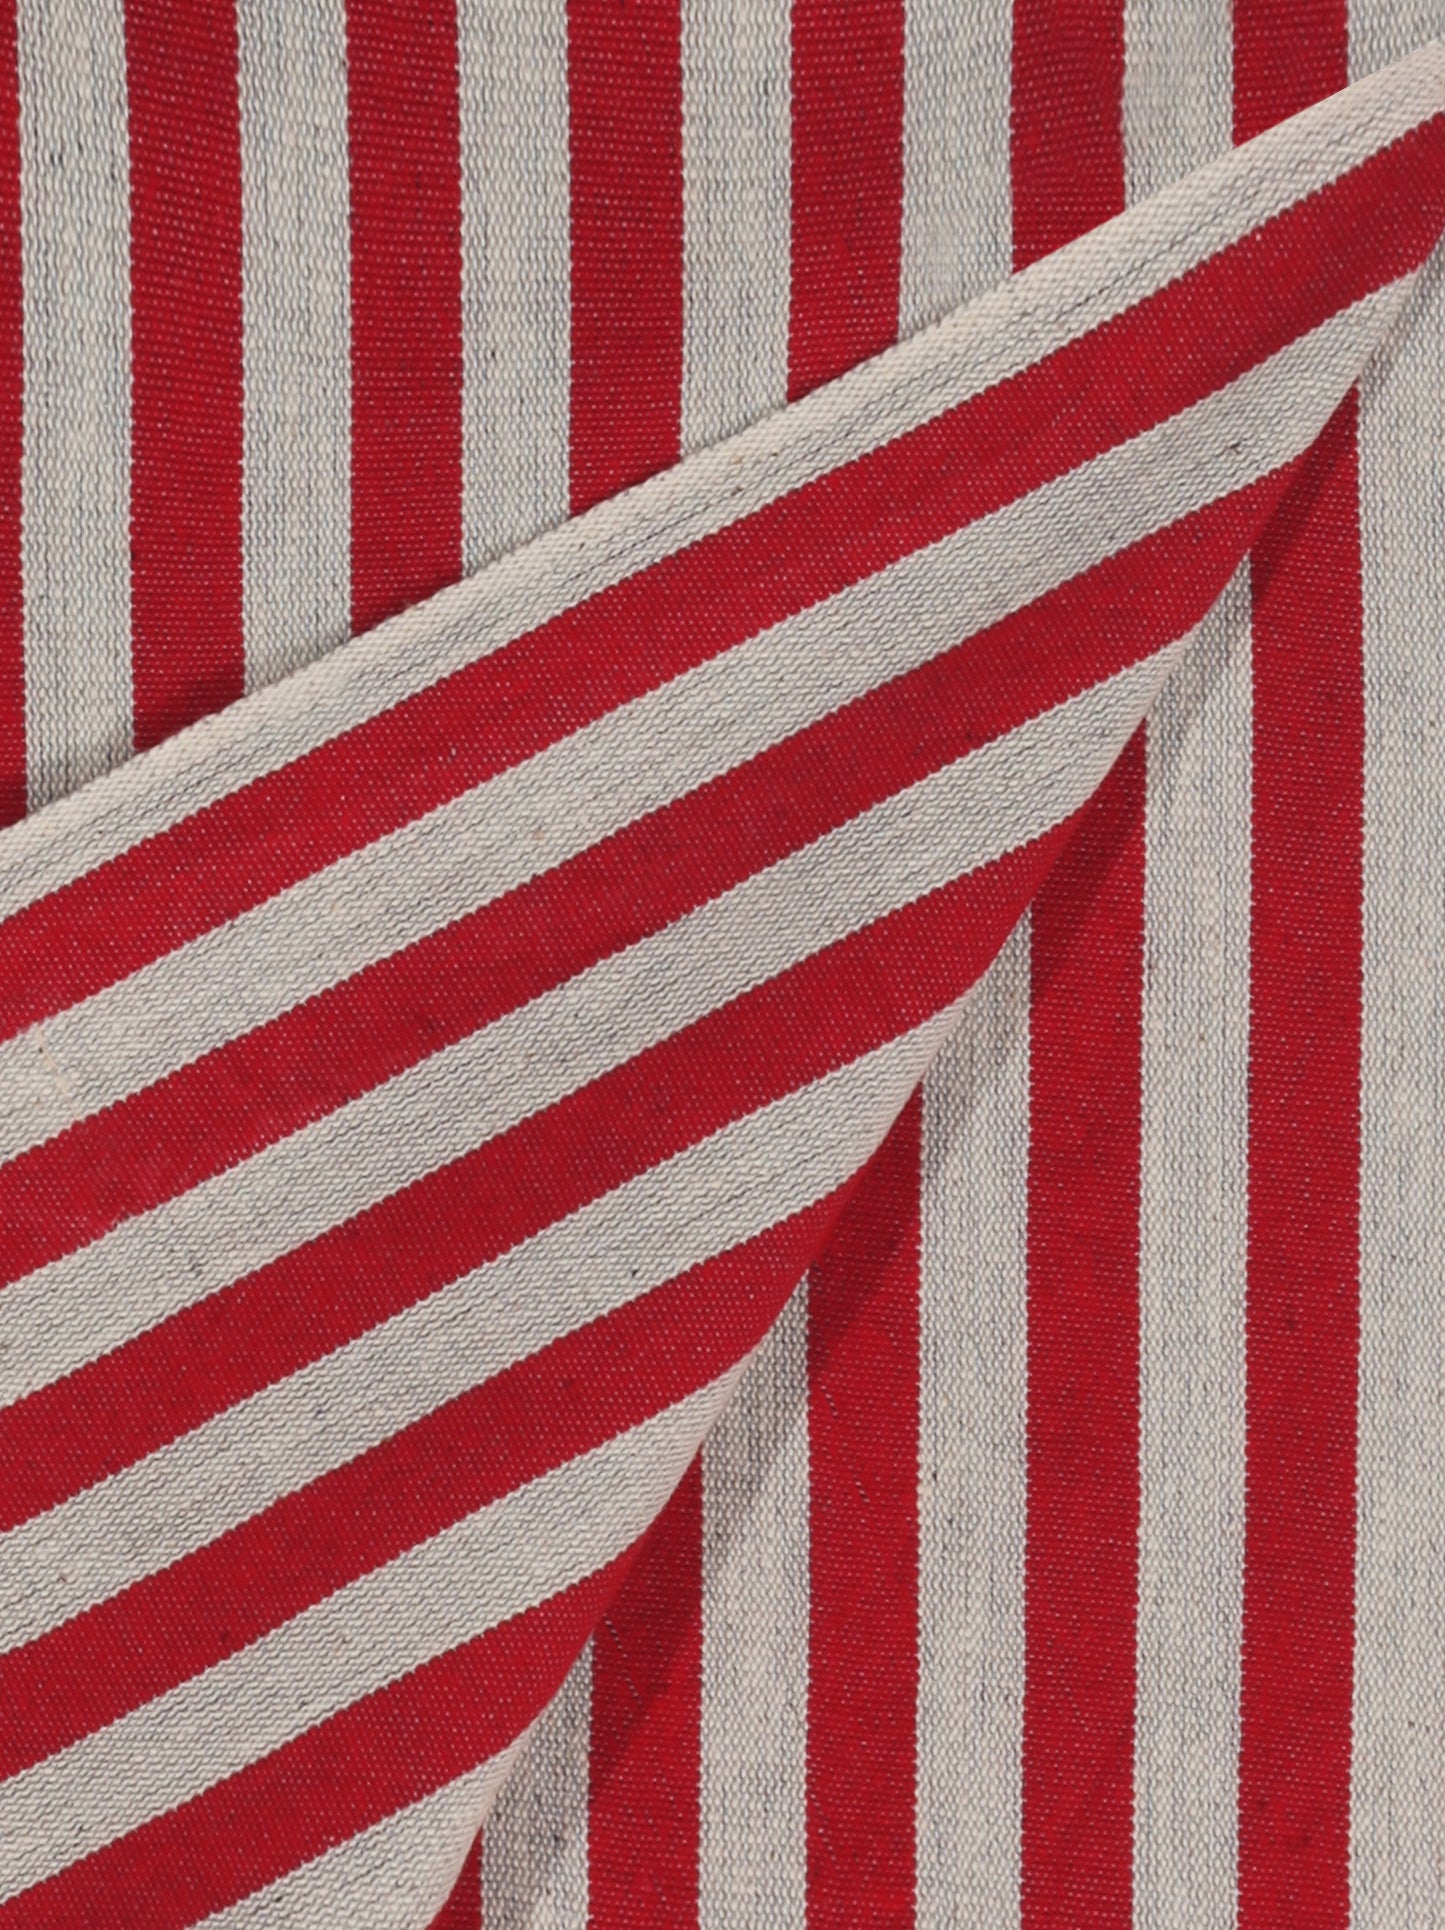 Striped Red Cushion Cover